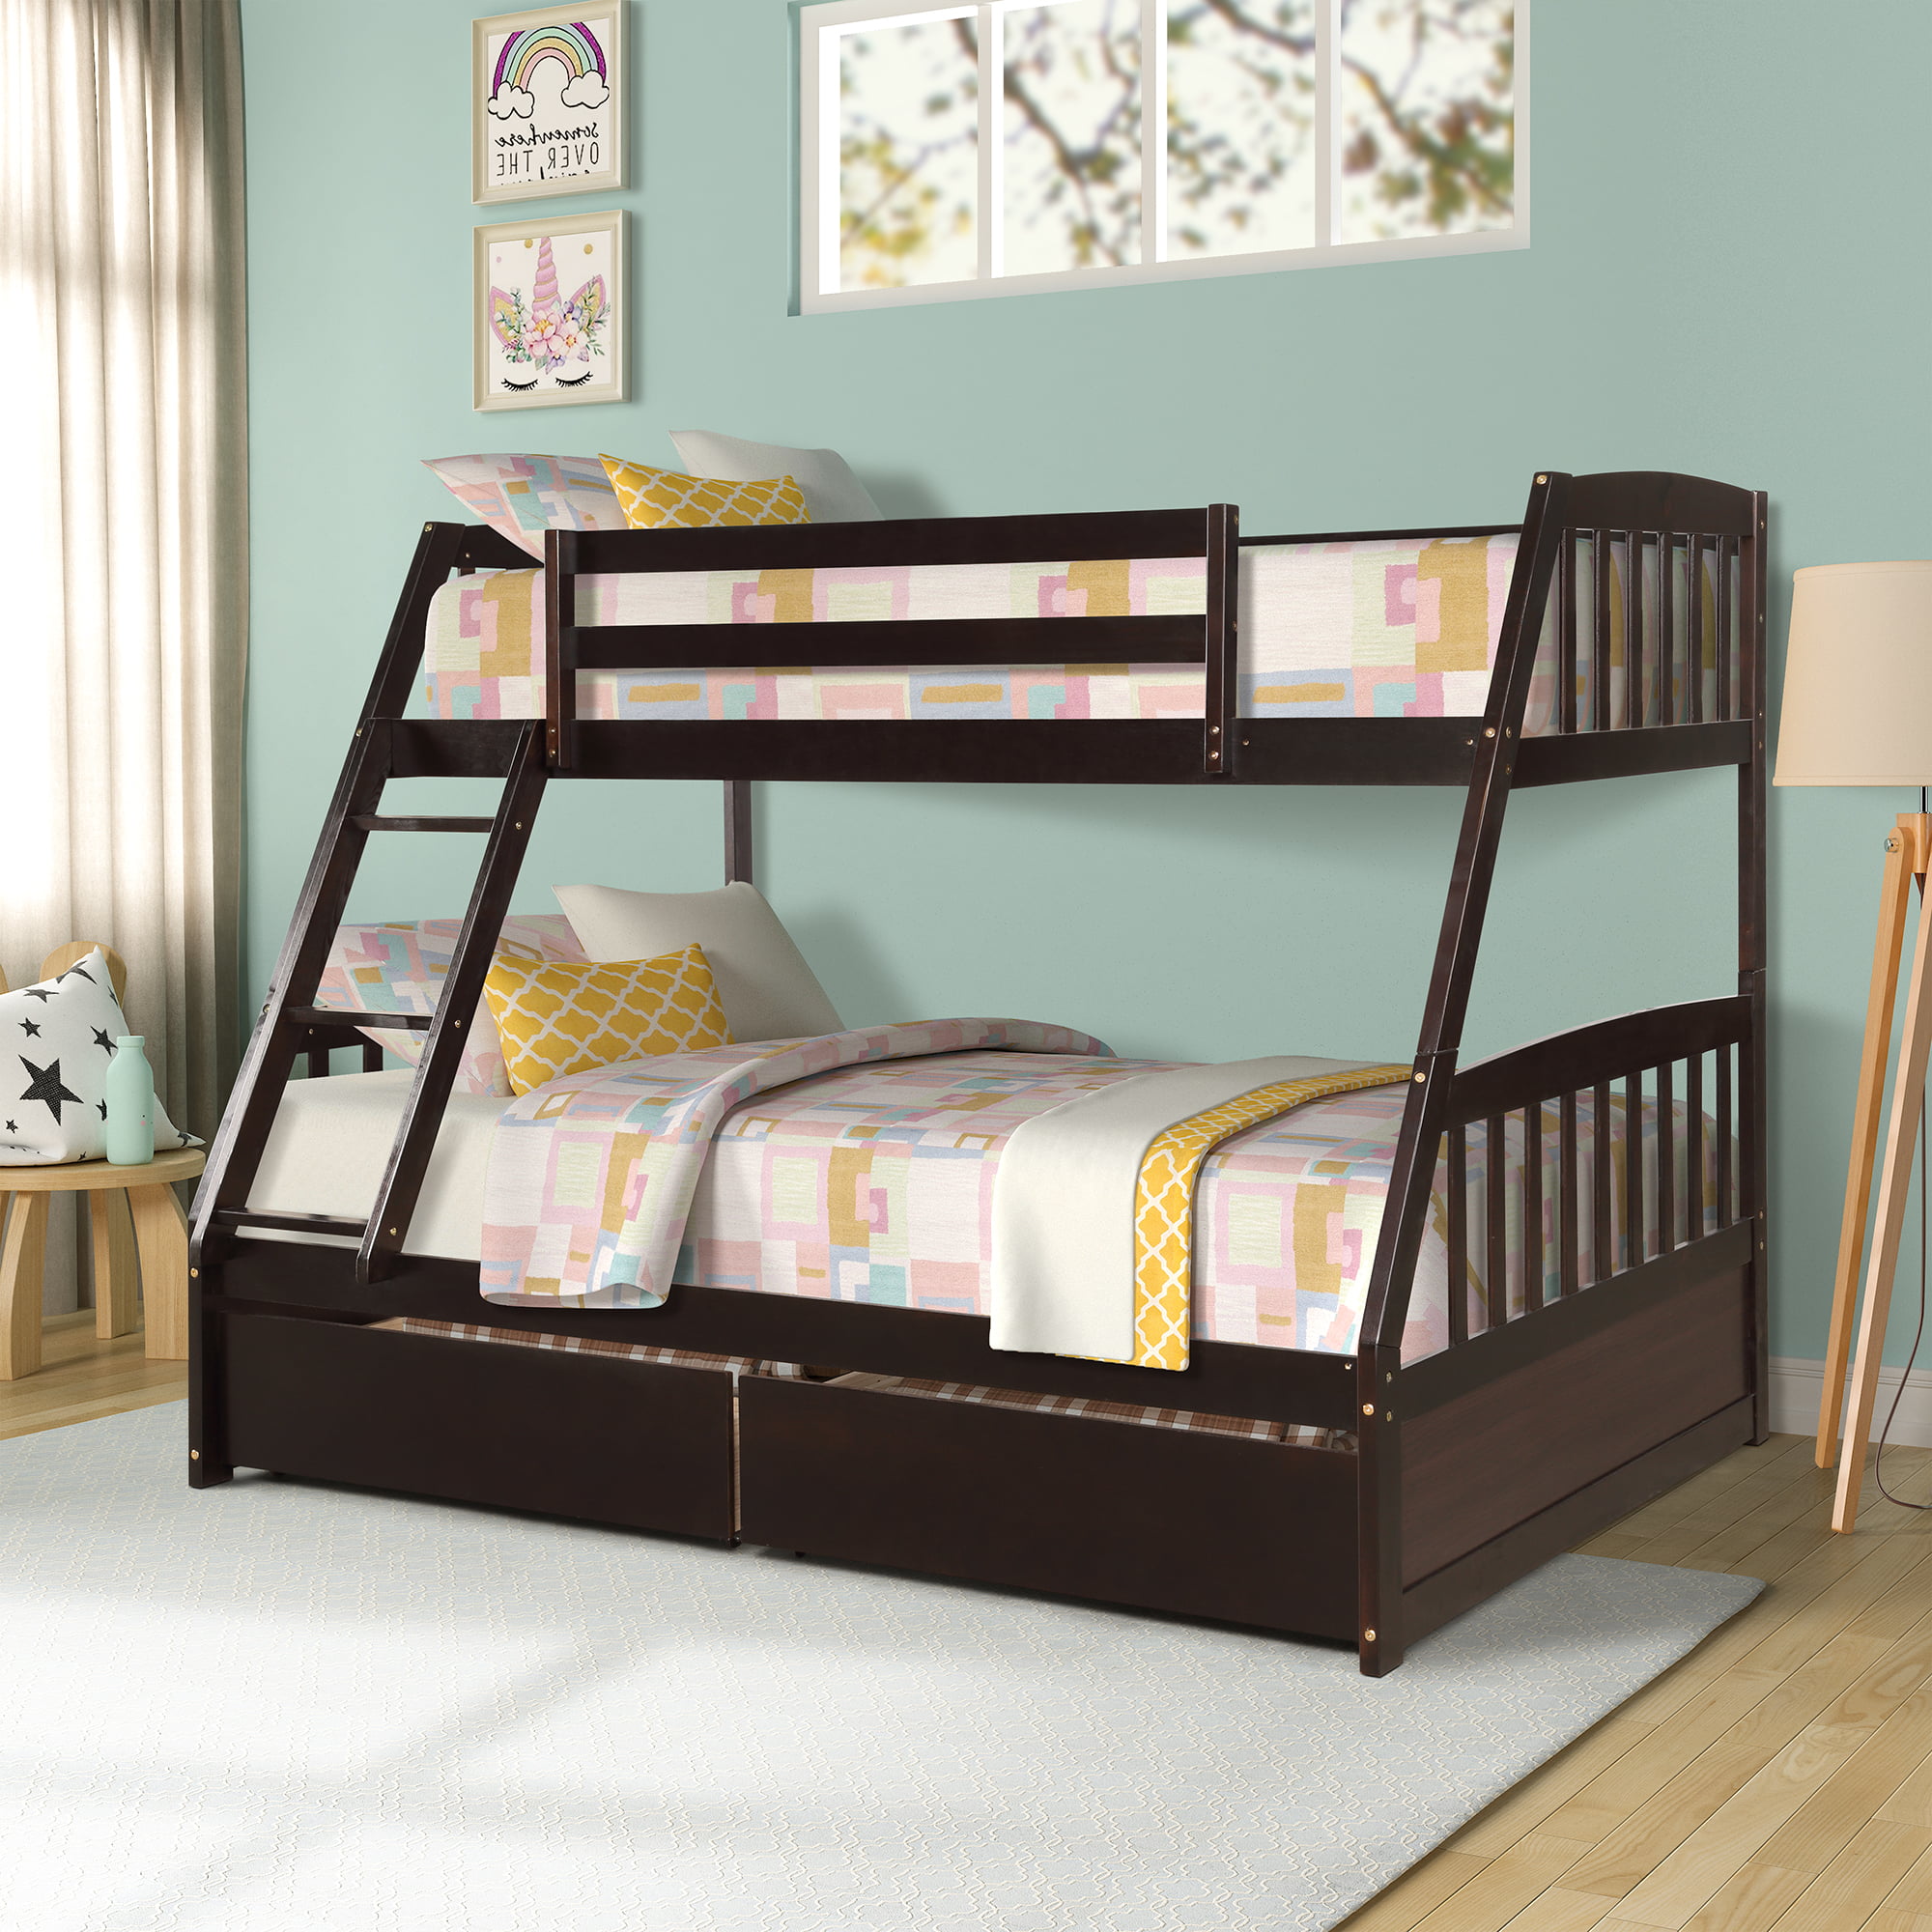 Headboard Twin Over Full Bunk Bed, Wooden Bunk Beds Twin Over Full With Drawers